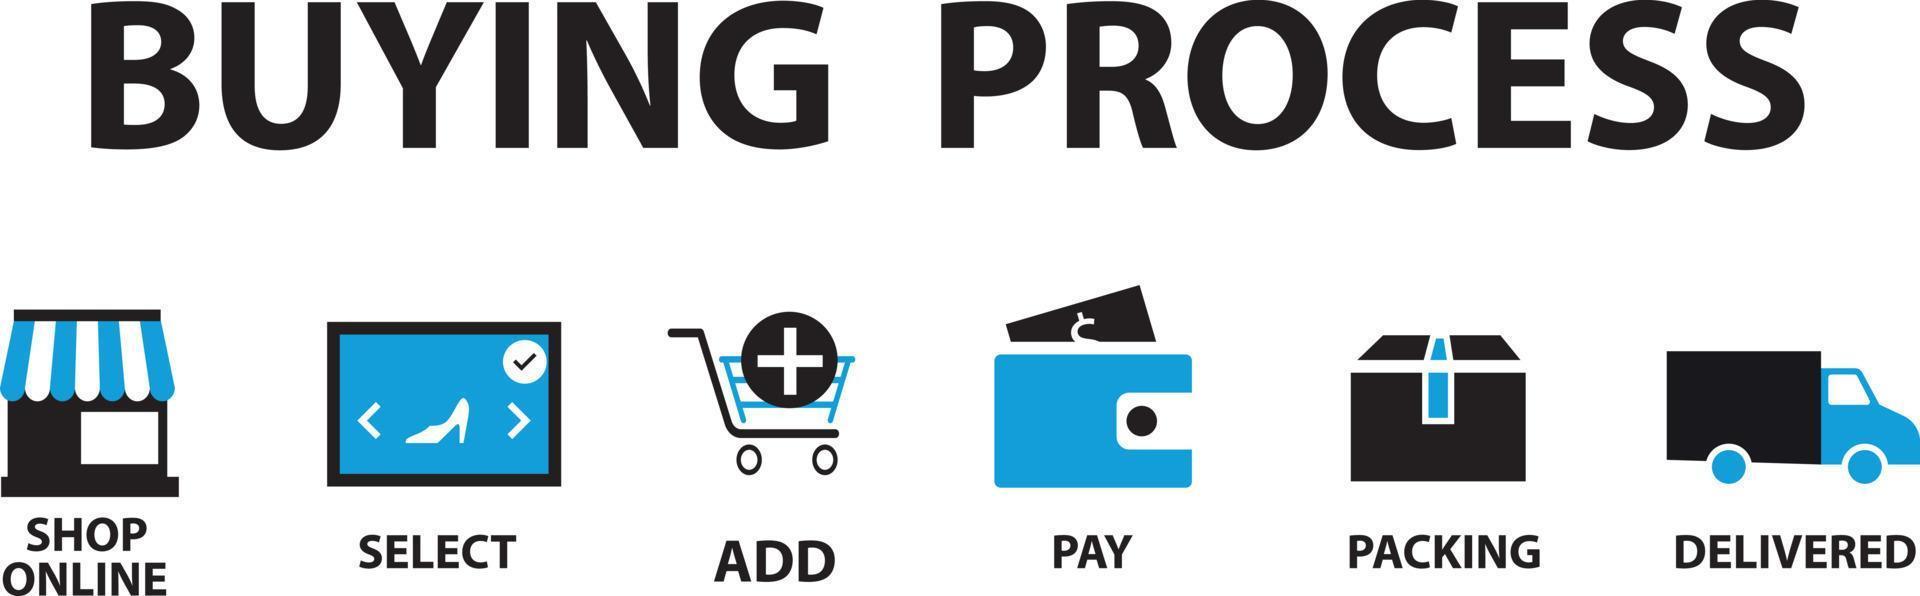 Buying Process icon vector illustration . buying, process, select, add, check out, pay, packing, shipping, infographic, template, presentation, concept, banner, pictogram, icon set, icons